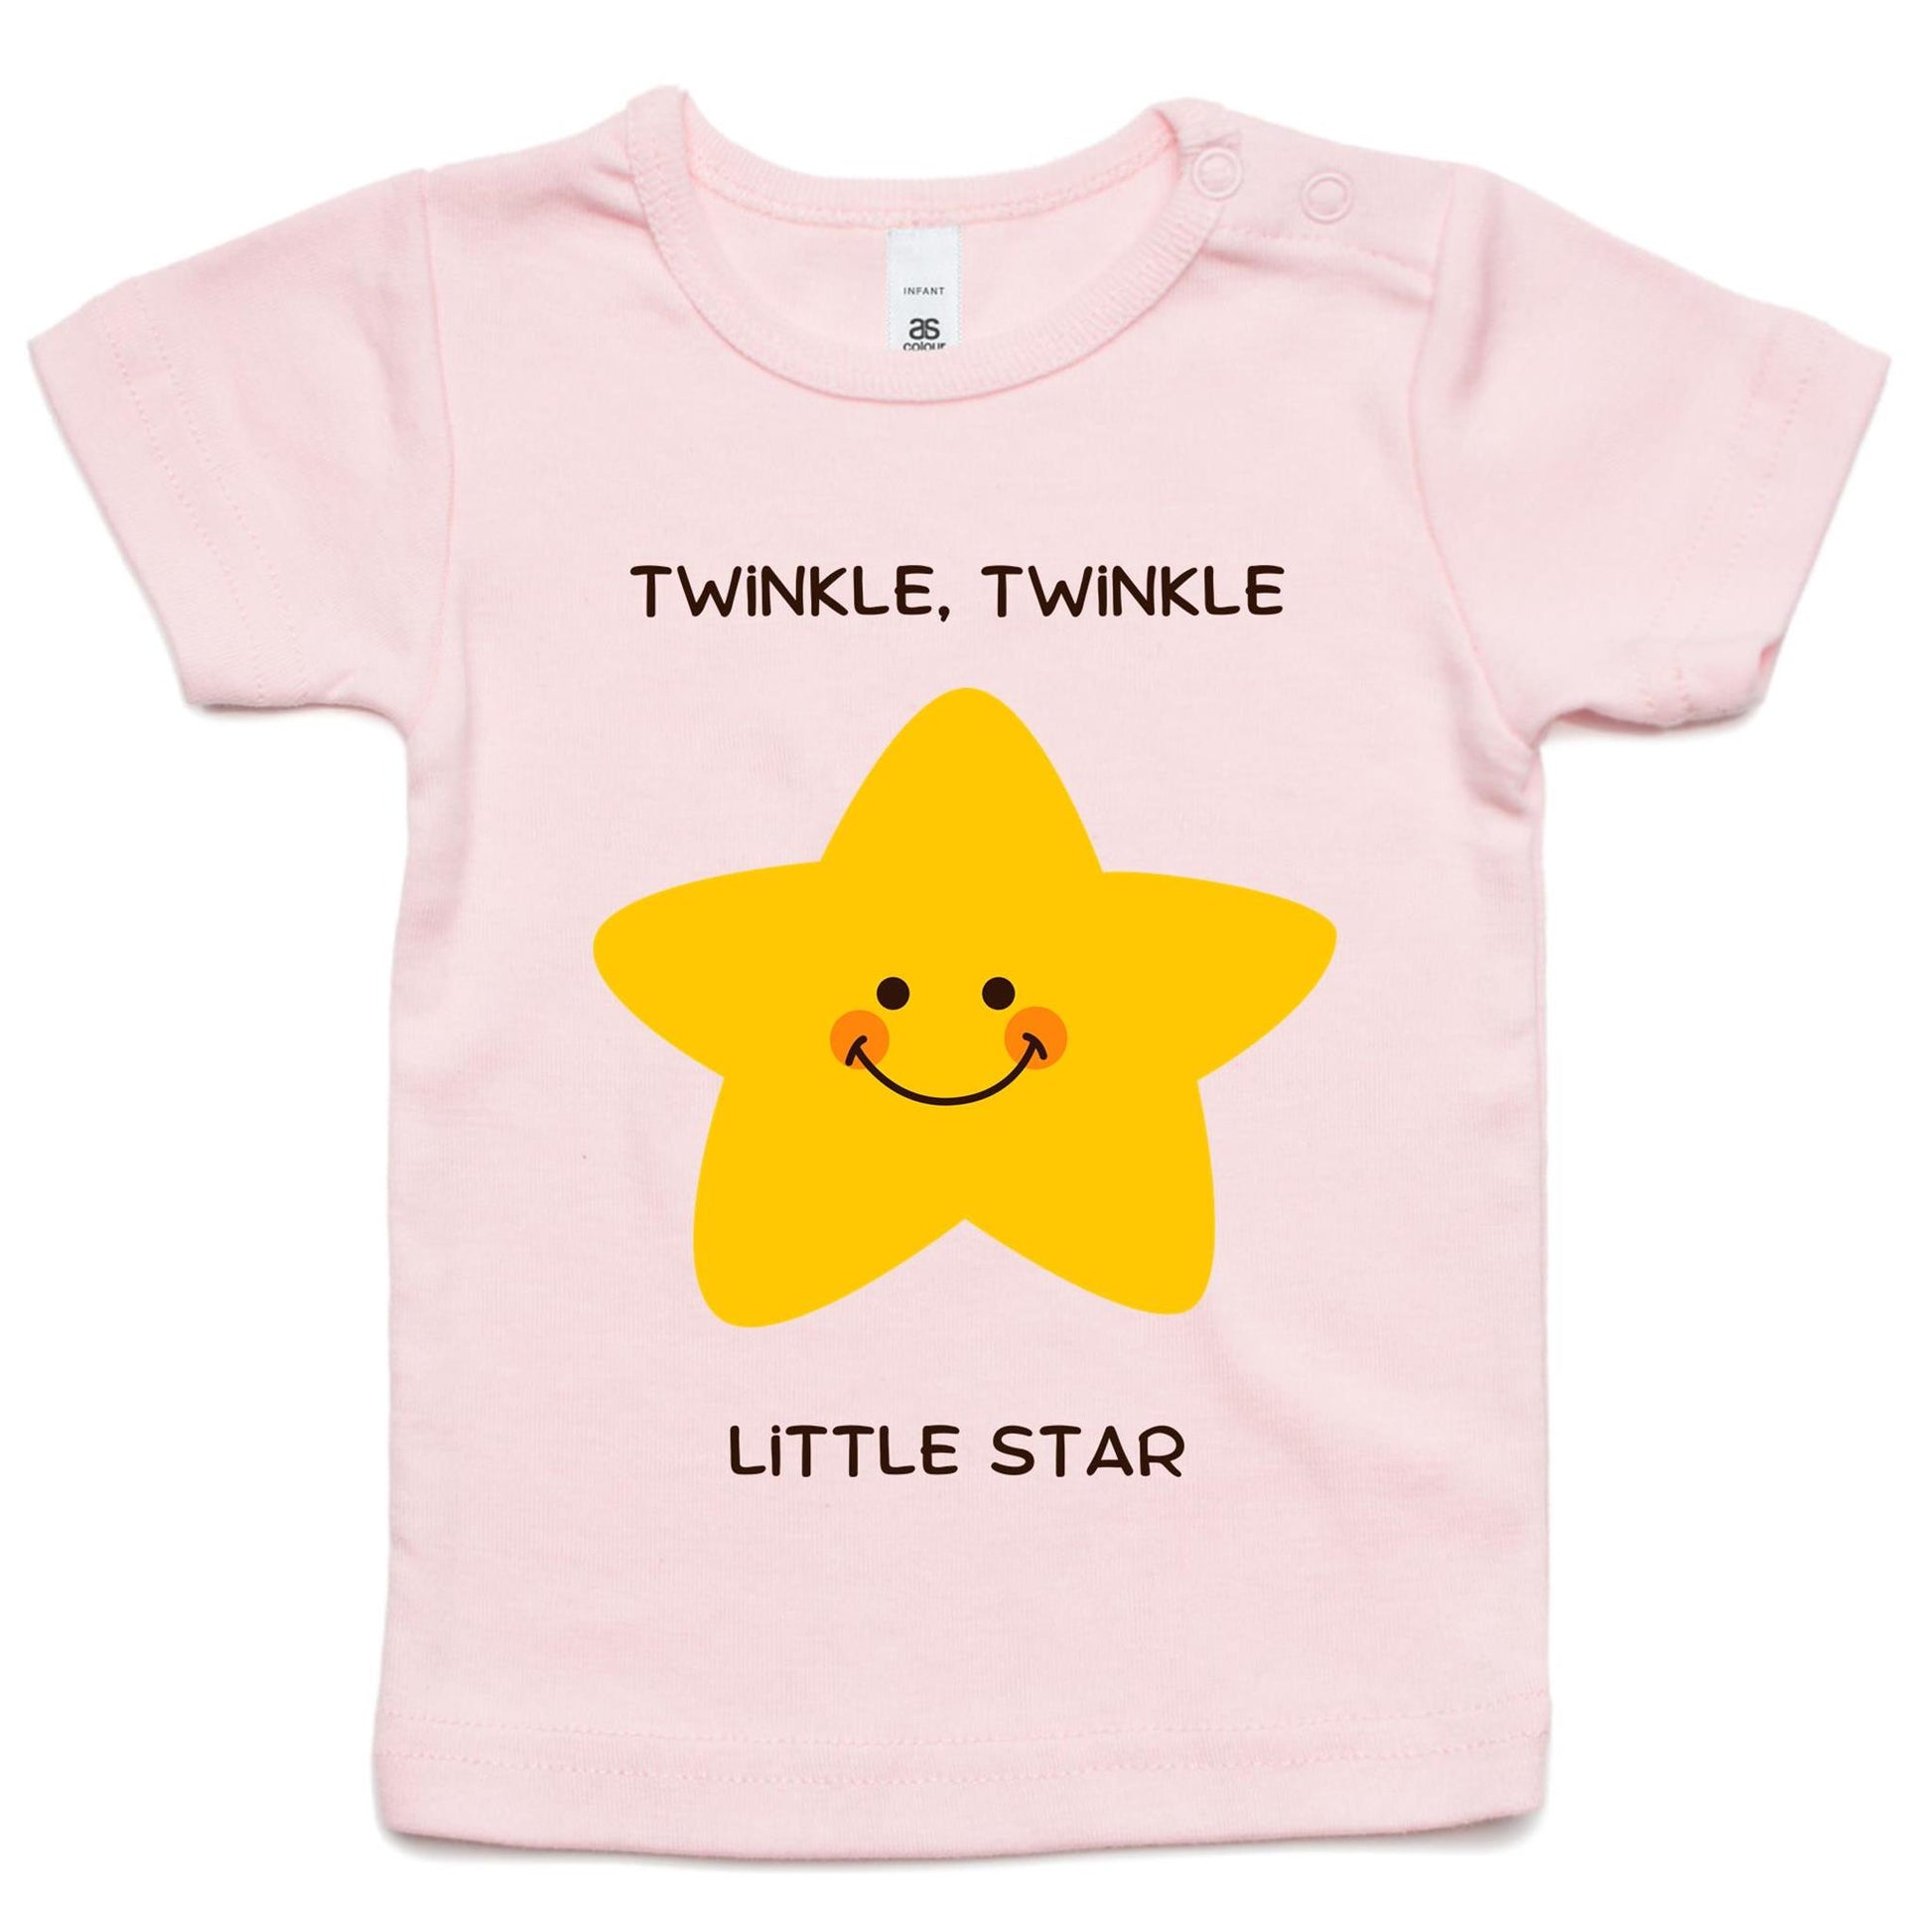 Twinkle Twinkle - Baby T-shirt Pink Baby T-shirt